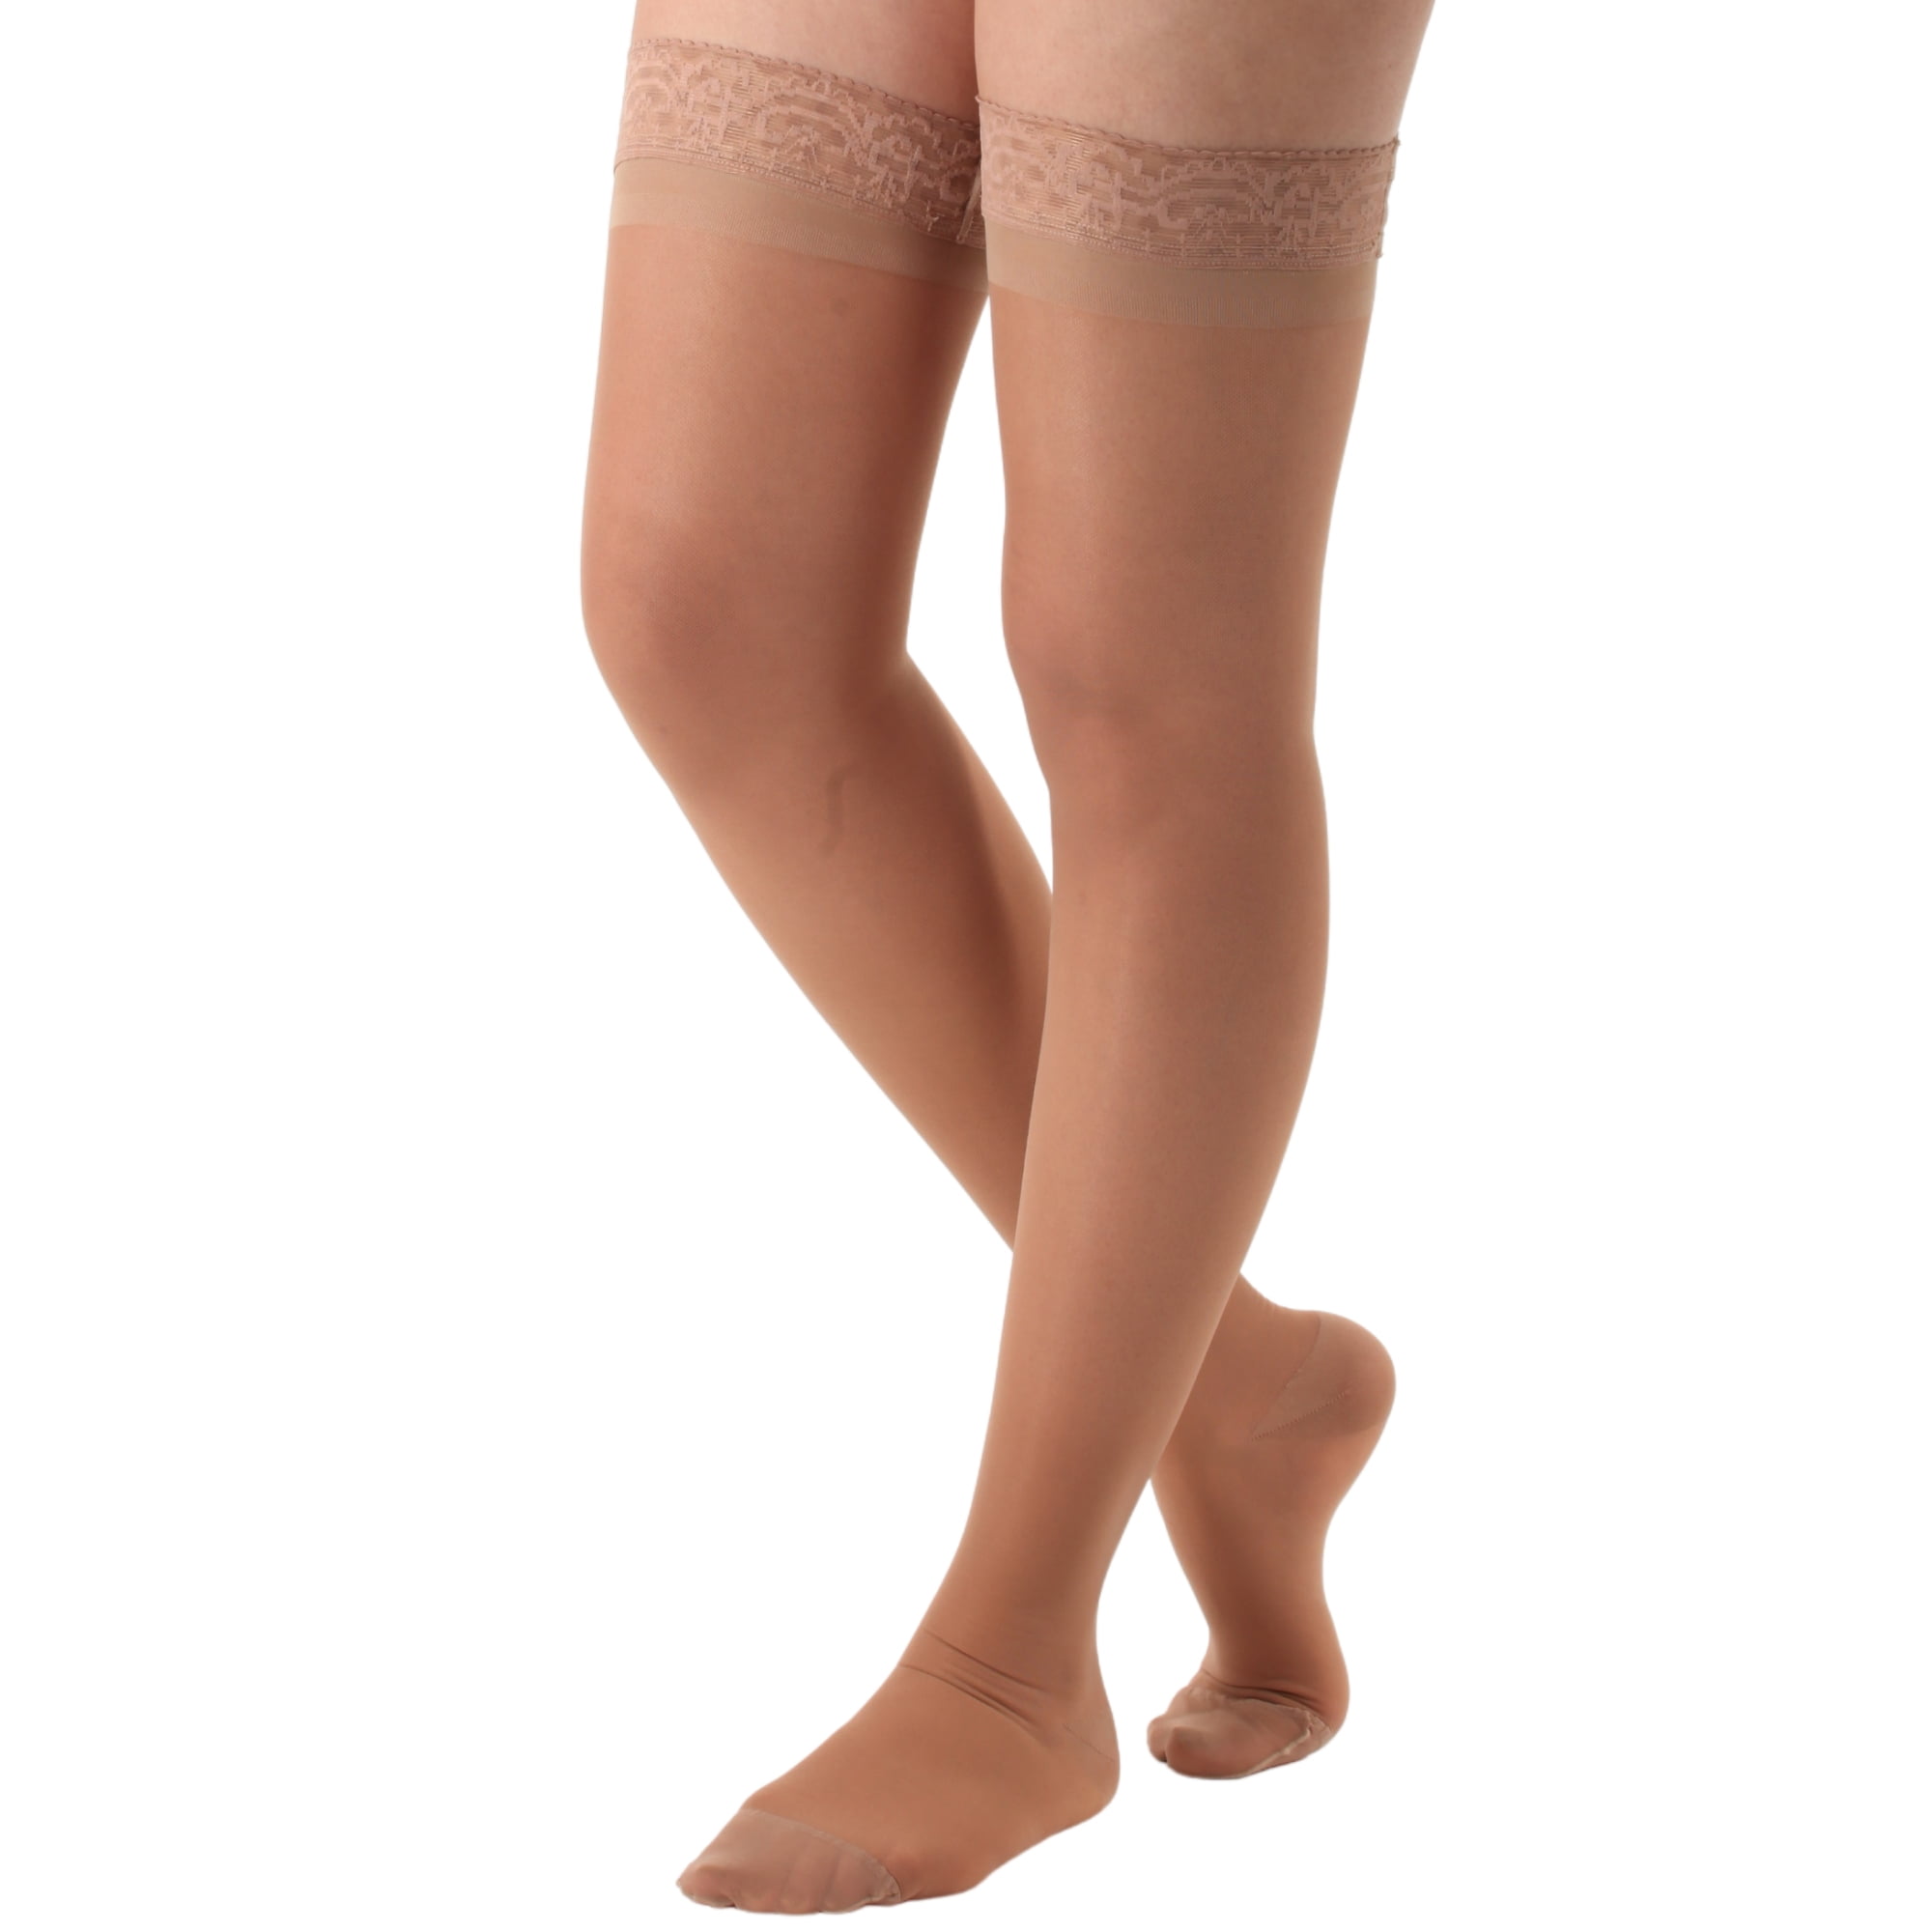 Sheer Compression Pantyhose l AW Style 15OT l Ames Walker Price